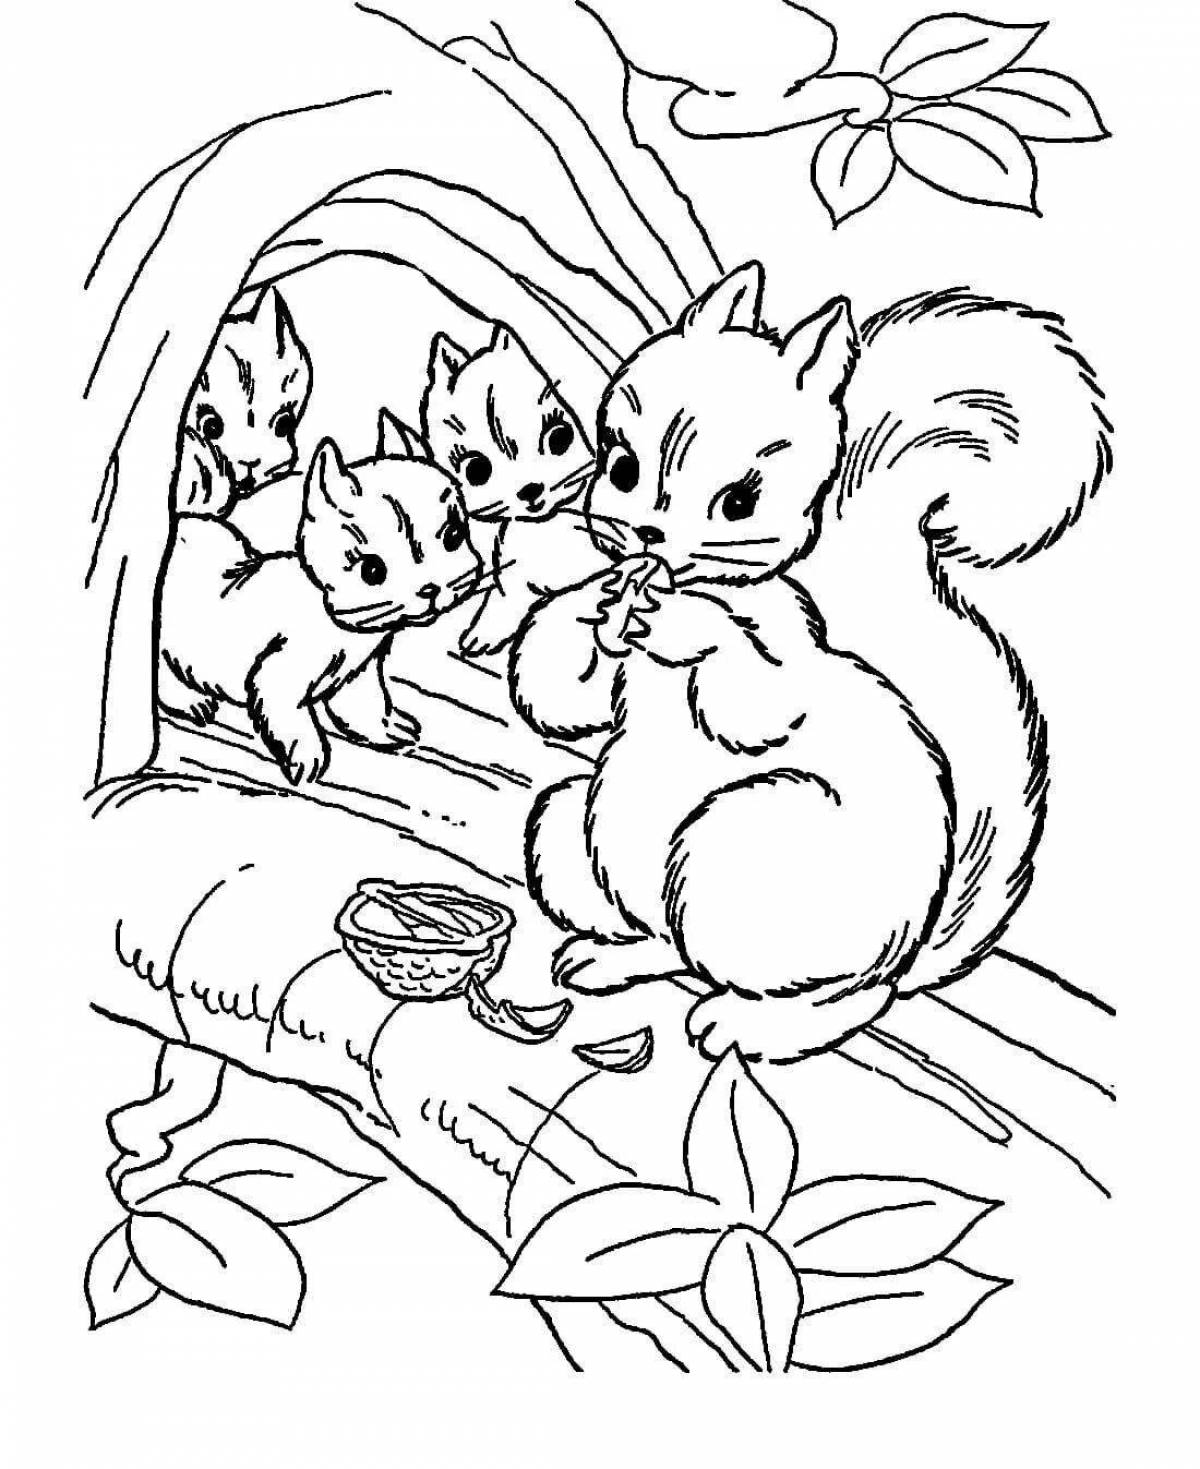 Cute squirrel coloring book for kids 6-7 years old